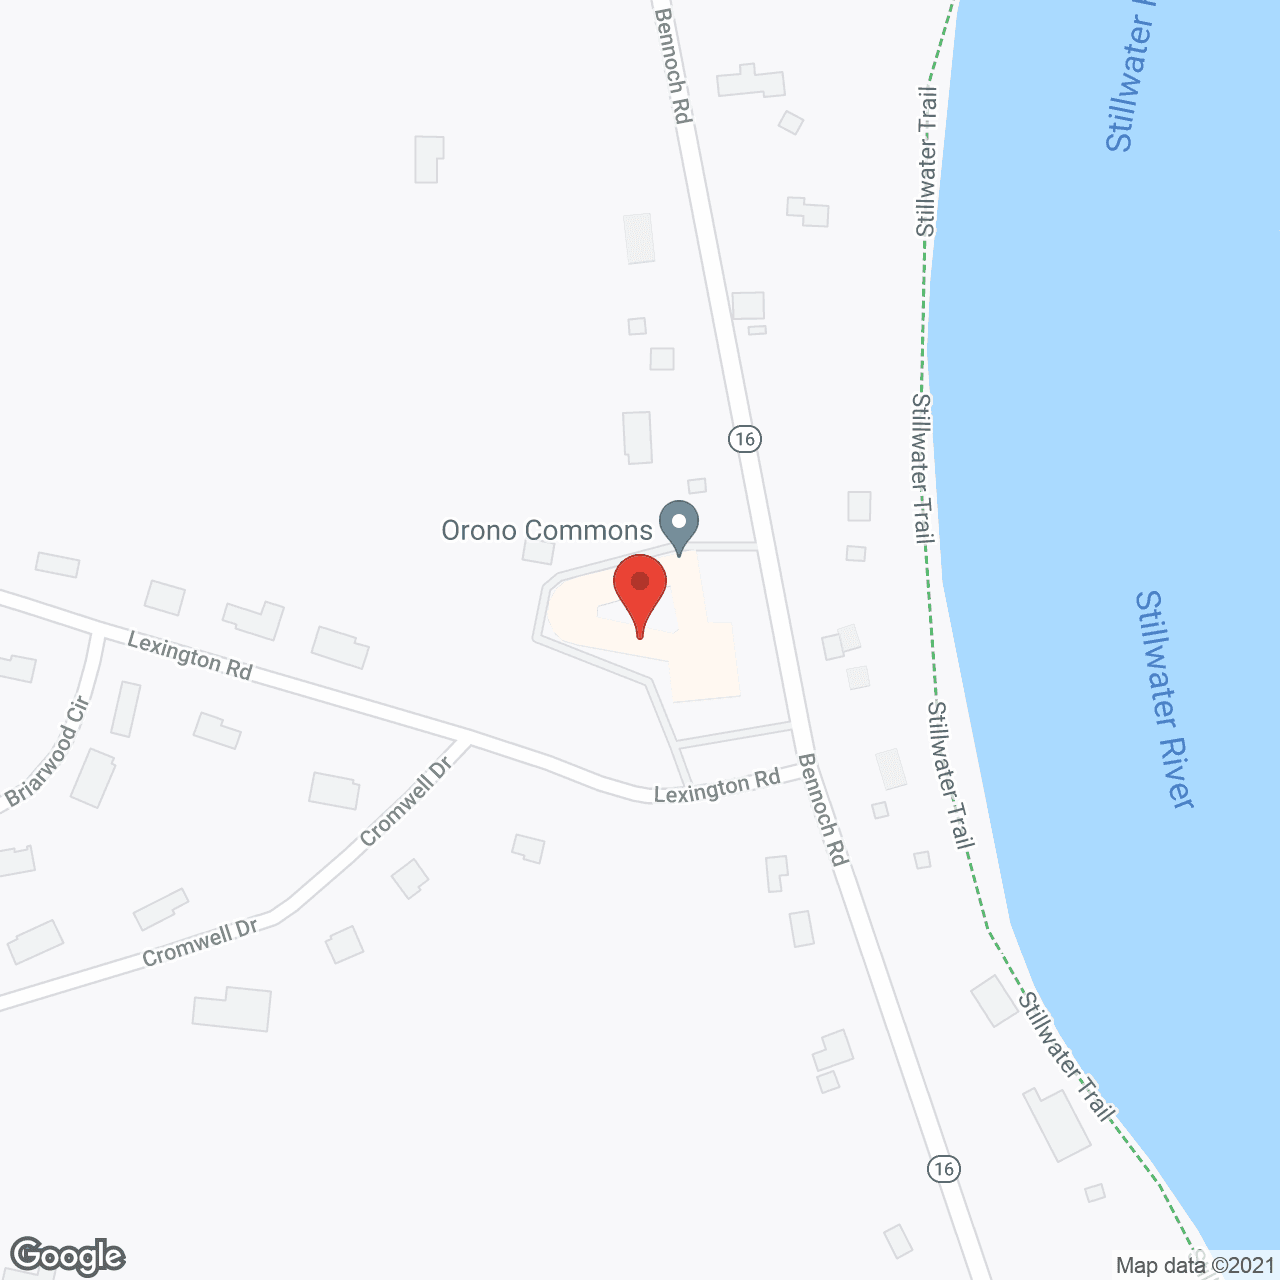 Orono Commons in google map